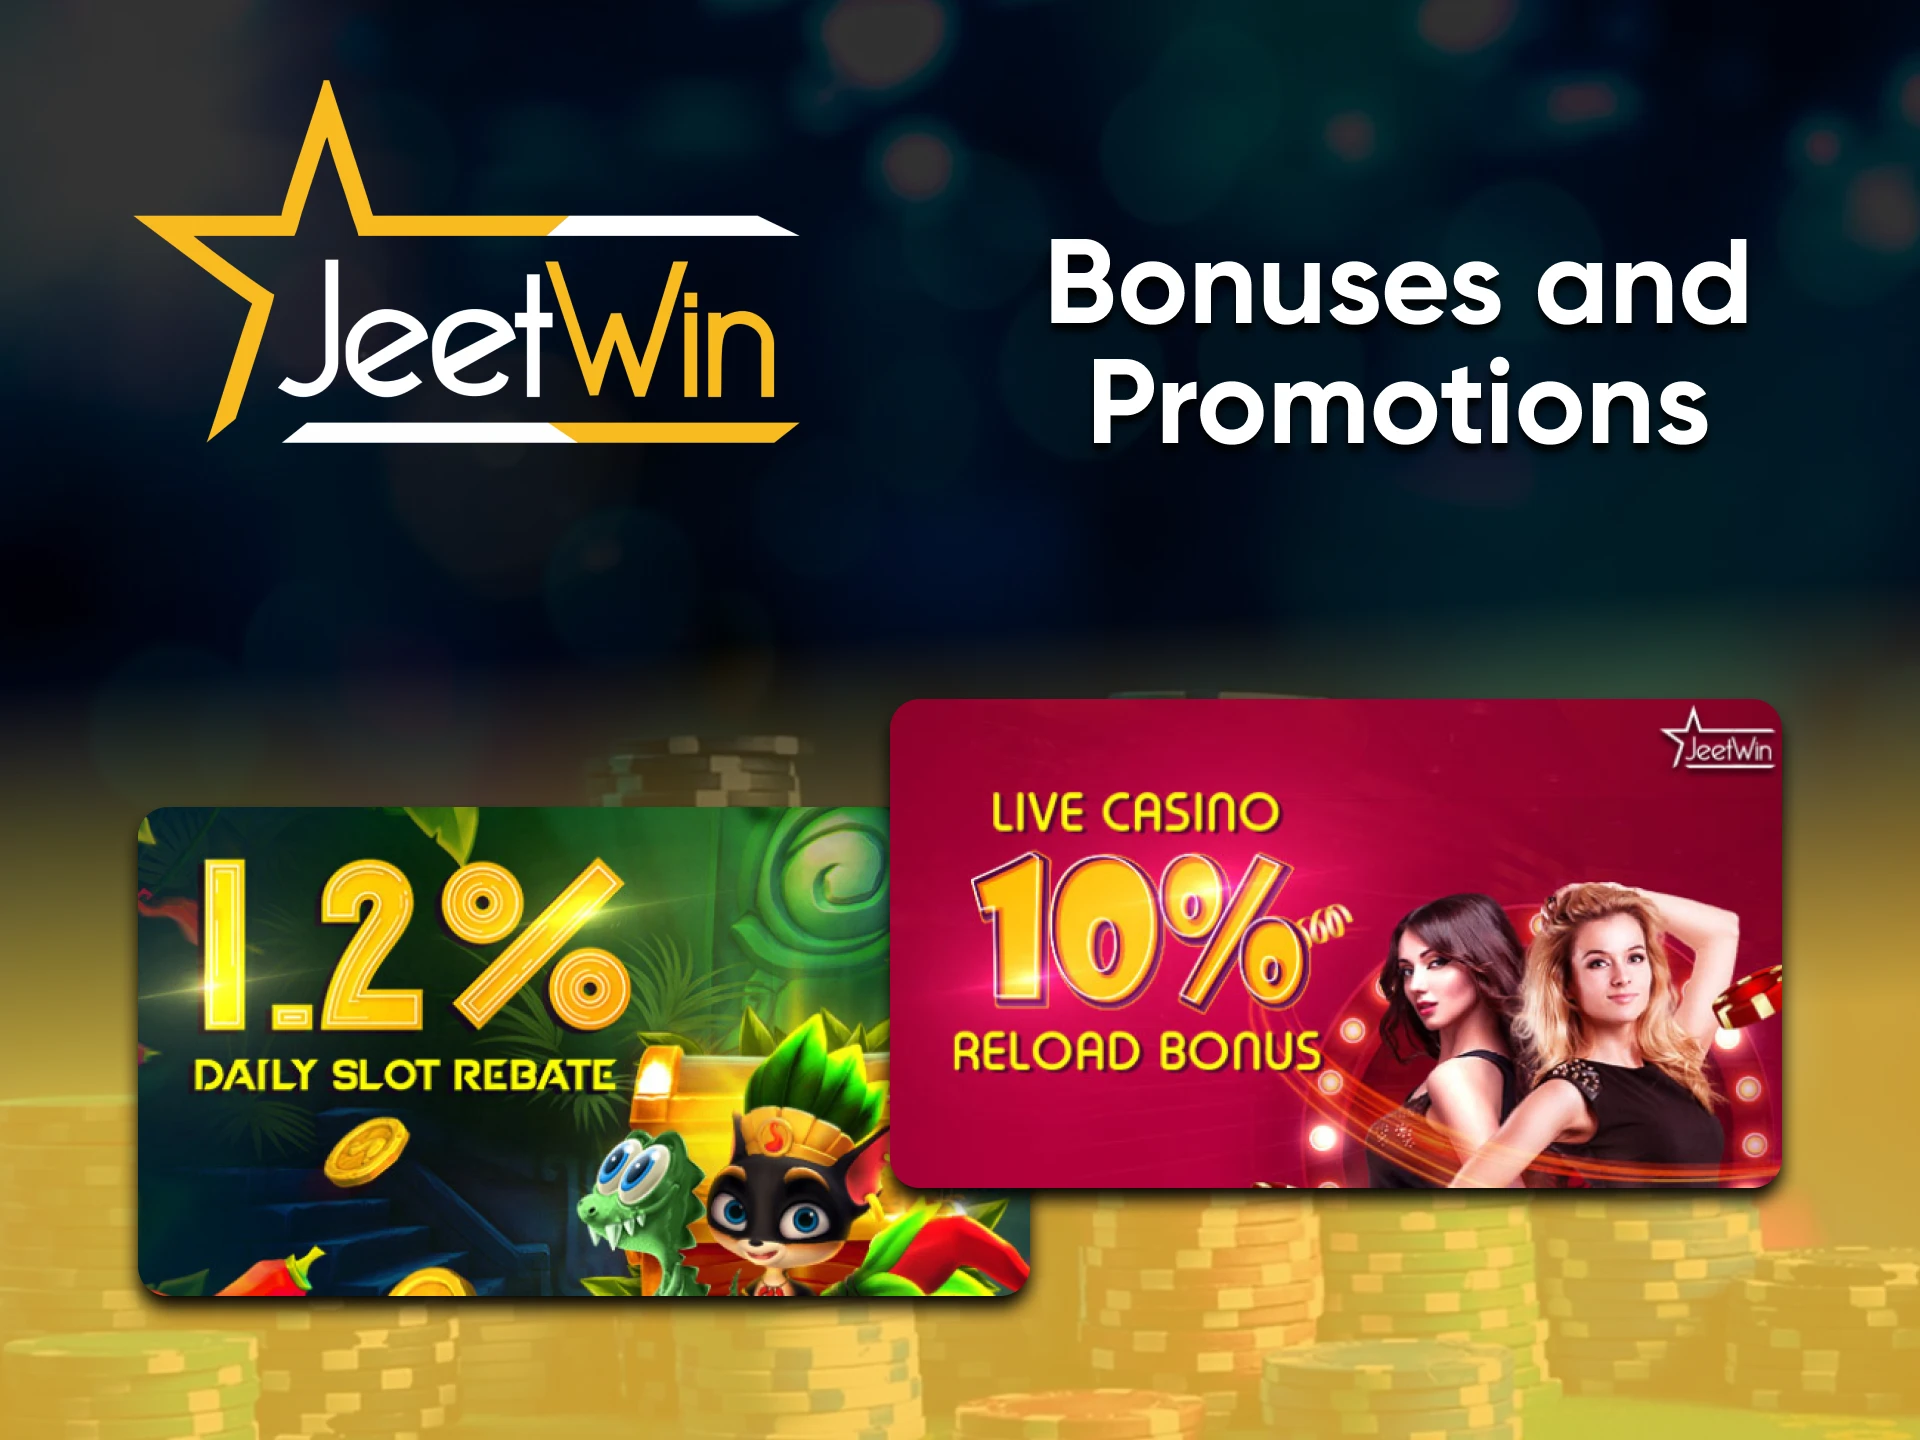 Play casino from Jeetwin and get bonuses.